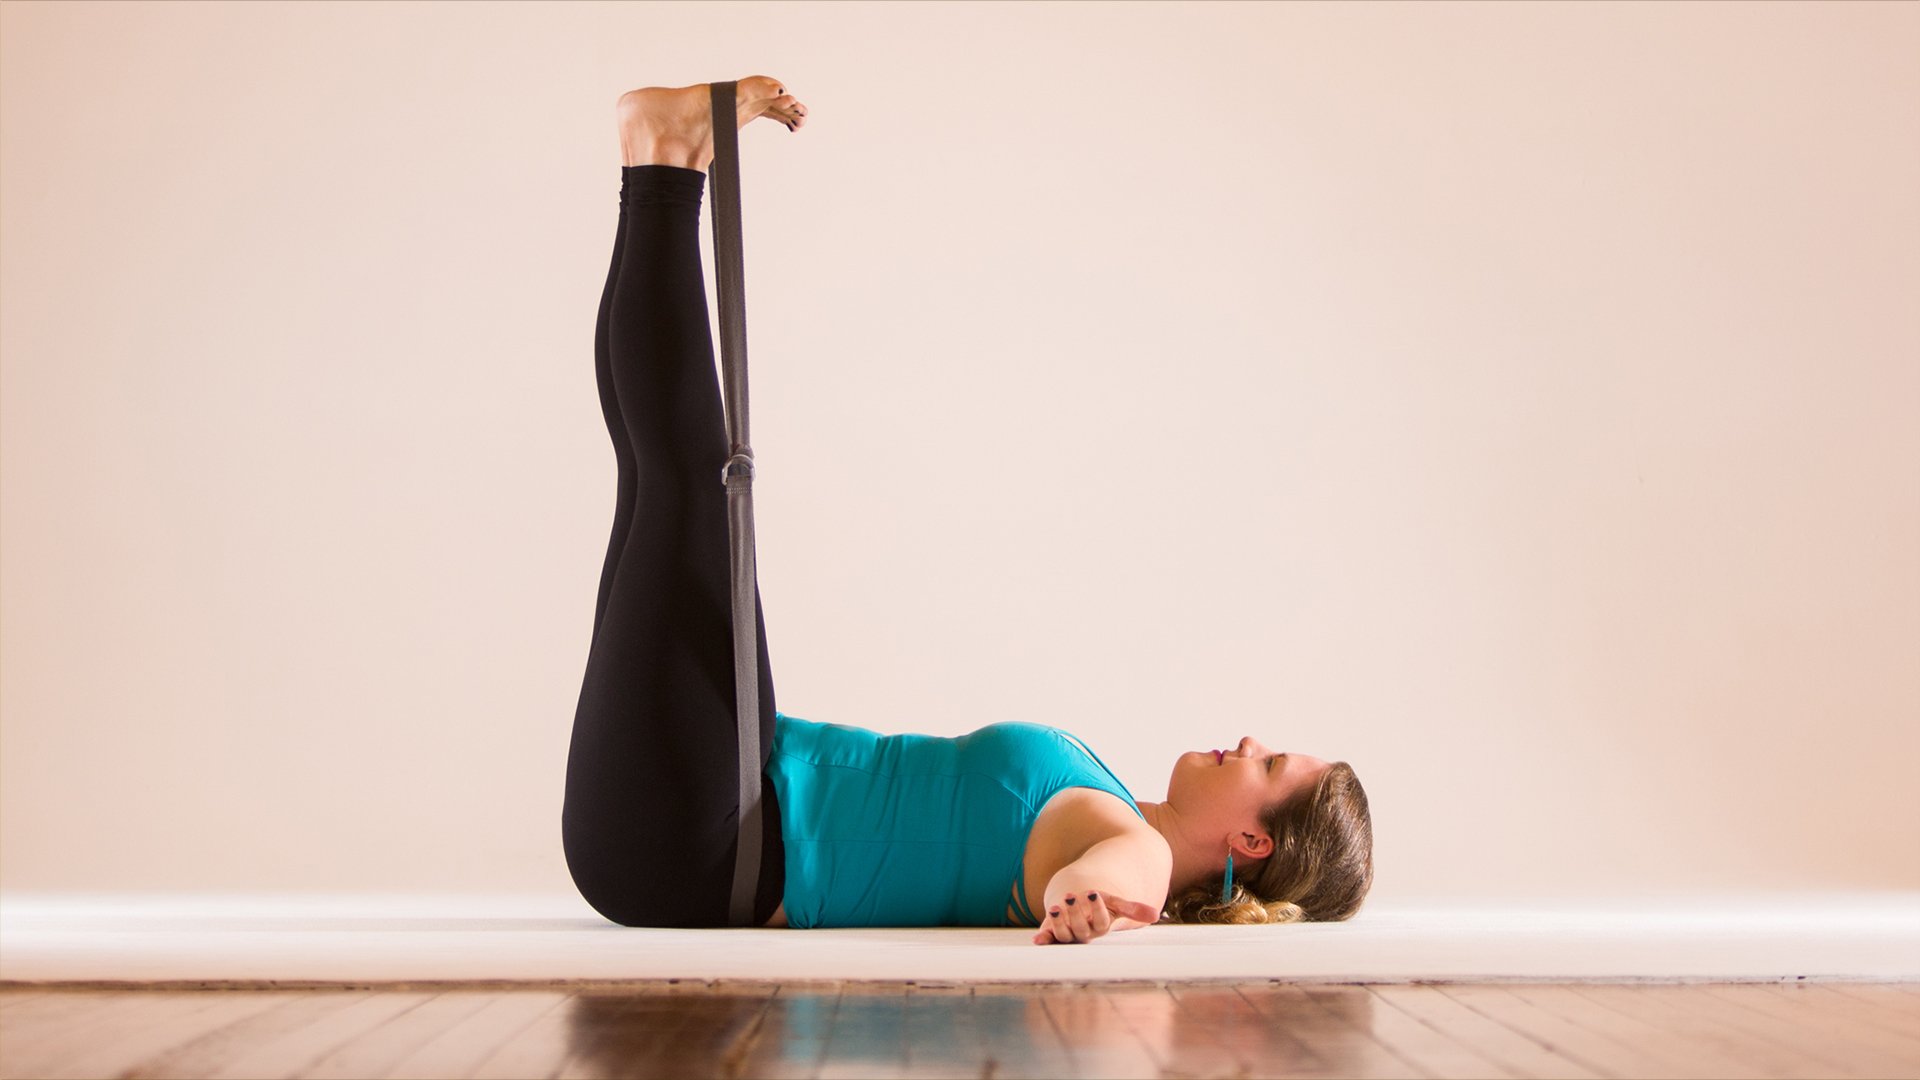 Details more than 80 yoga strap poses latest